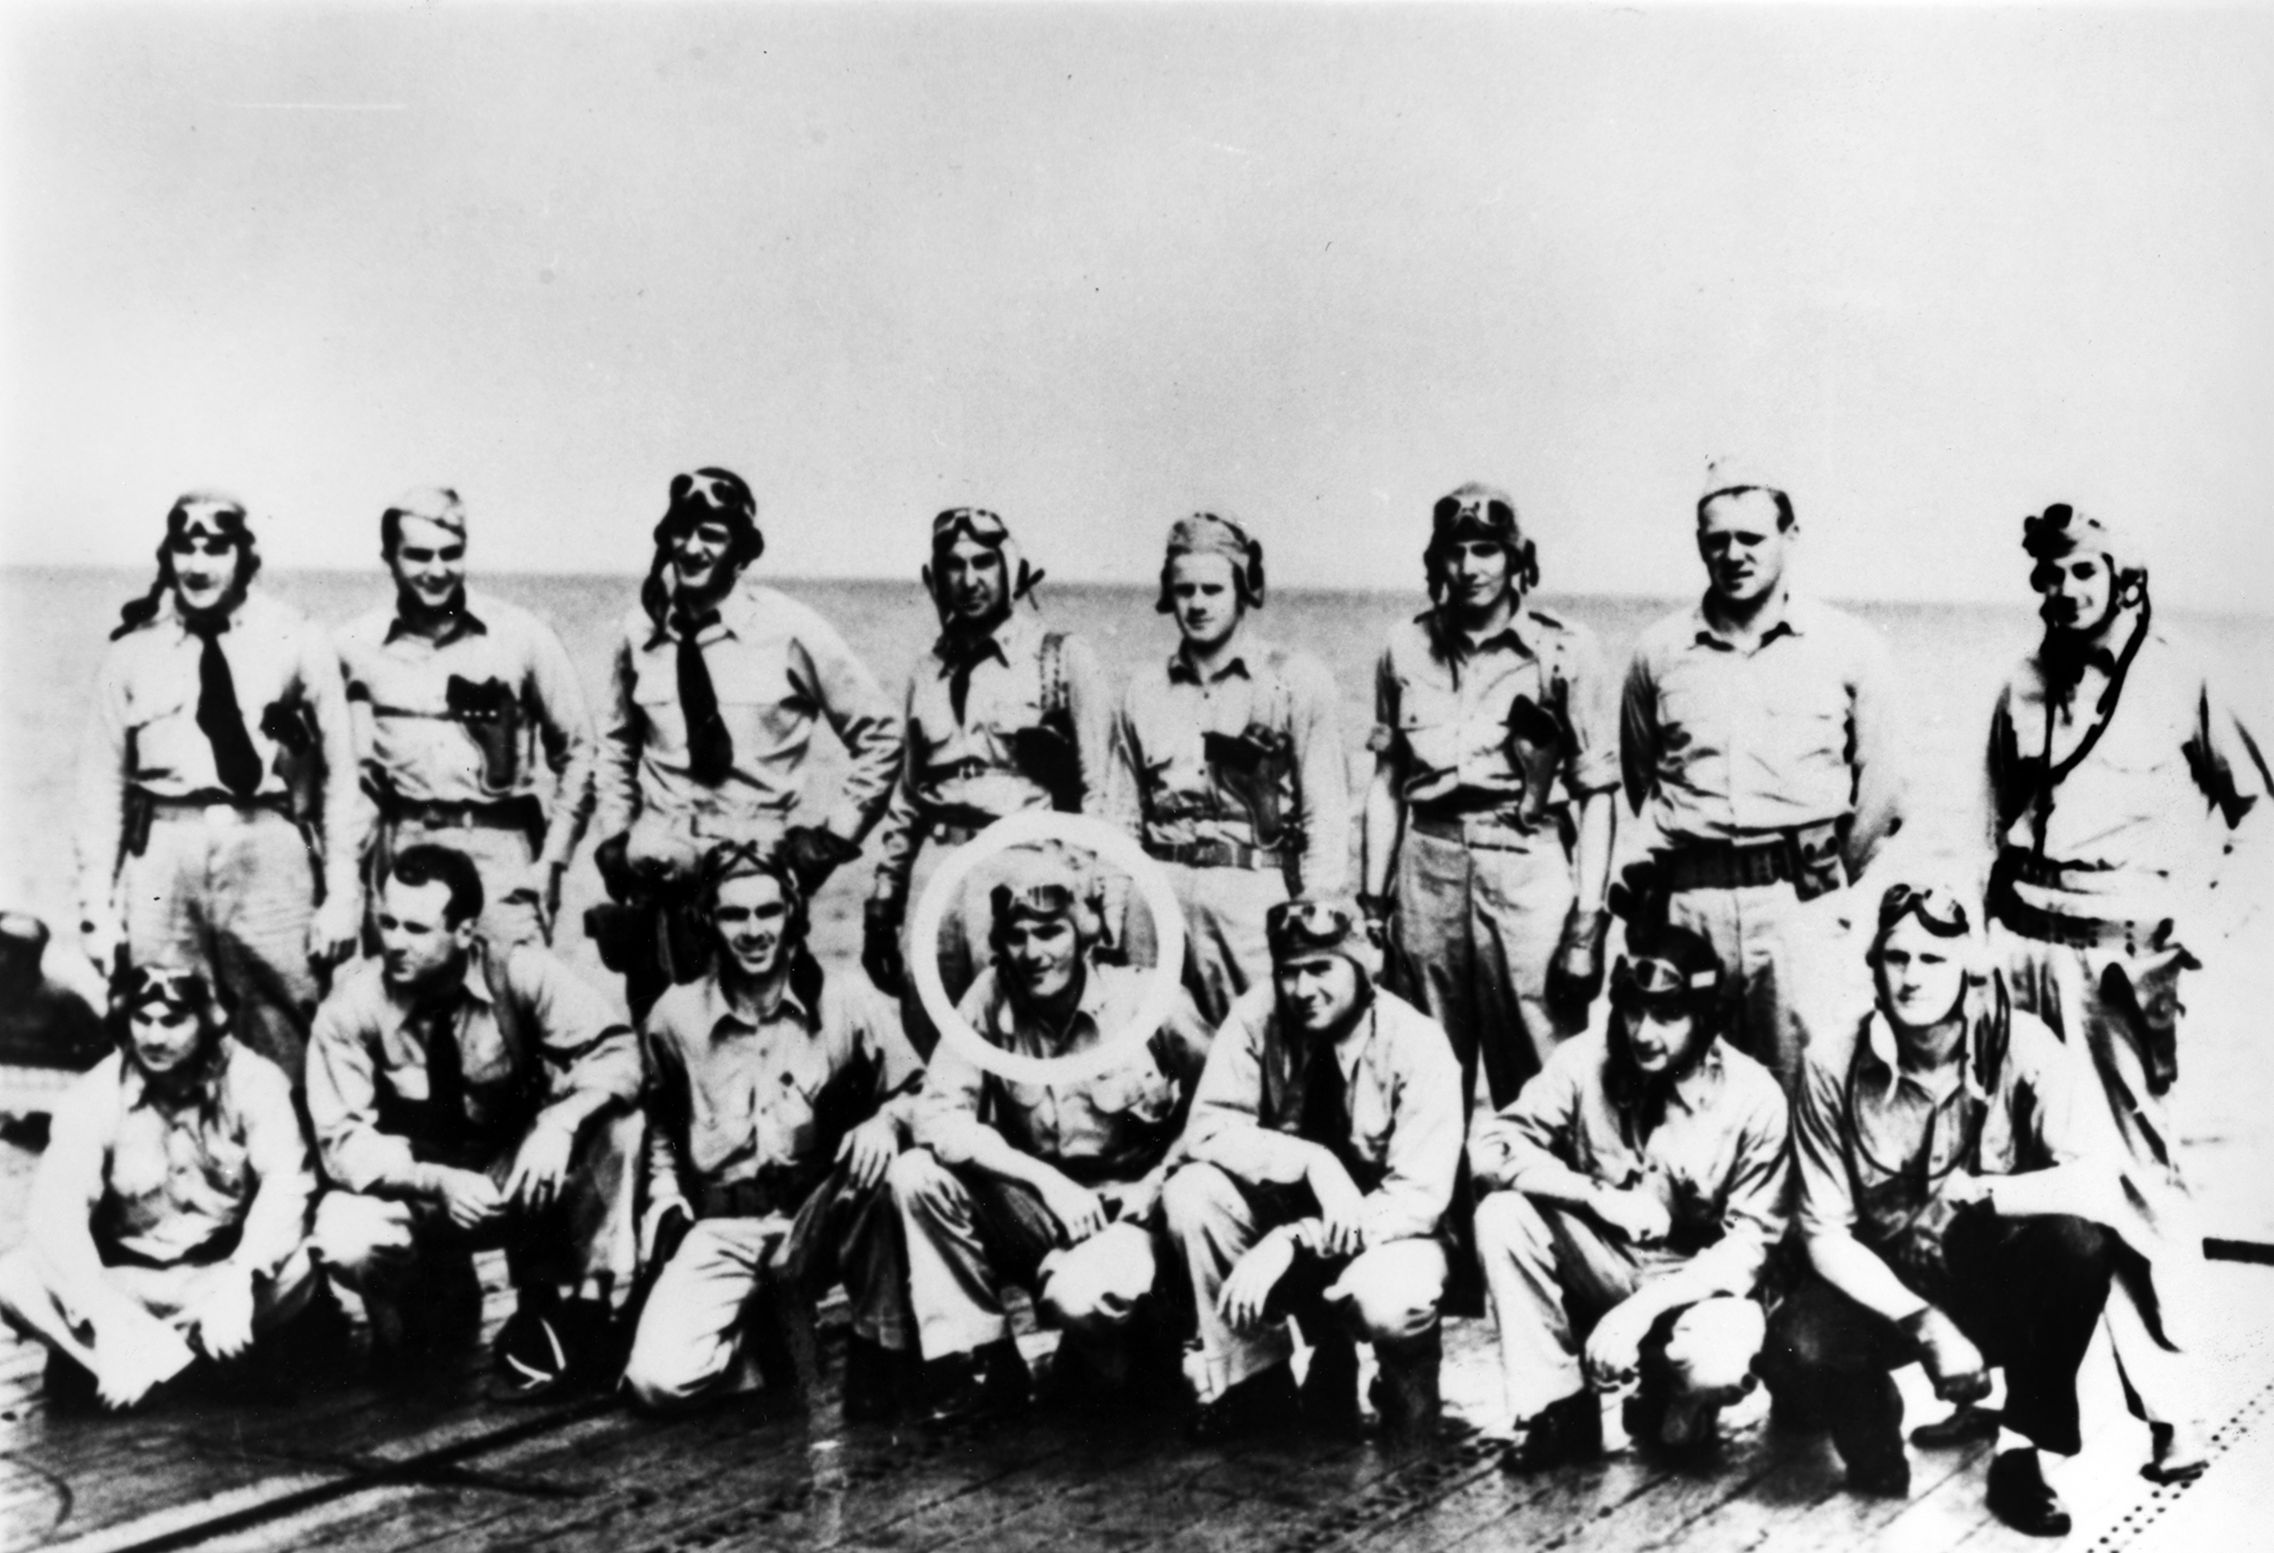 Members of the aircrew of Torpedo Squadron 8 photographed on the flight deck of the USS Hornet in May 1942. The squadron was decimated at the Battle of Midway the following month, with Ensign George Gay (circled) the only survivor from Torpedo 8 that flew from the USS Hornet. Squadron commander, Lieutenant Commander John C. Waldron, is shown standing third from left. 